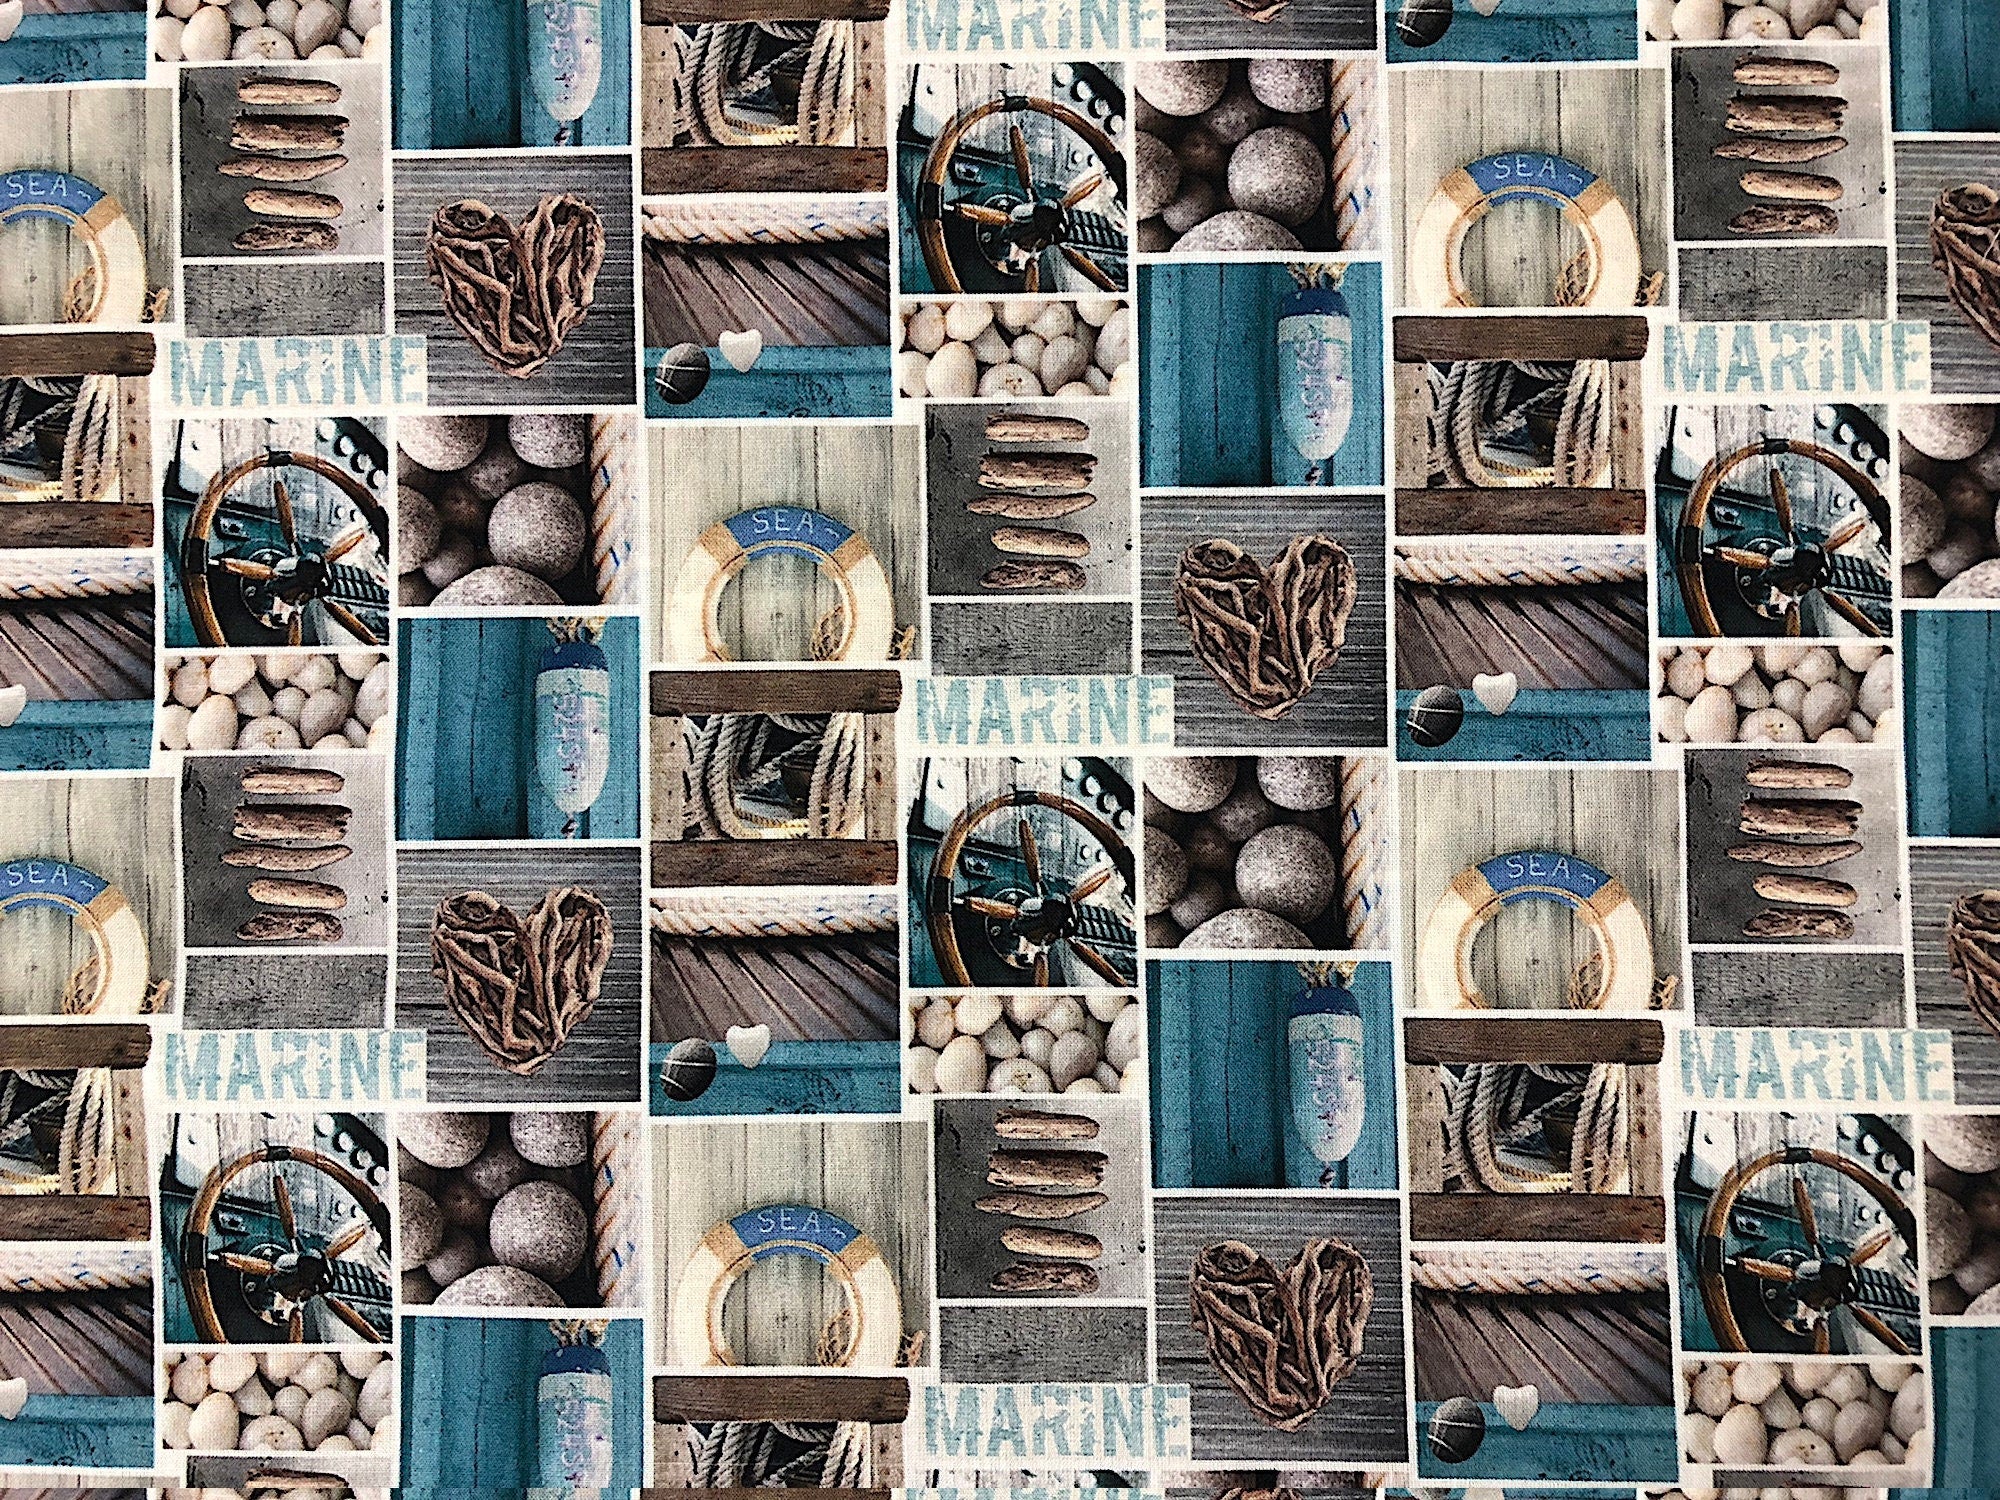 This nautical ocean fabric has drift wood, rocks, and beach related items.